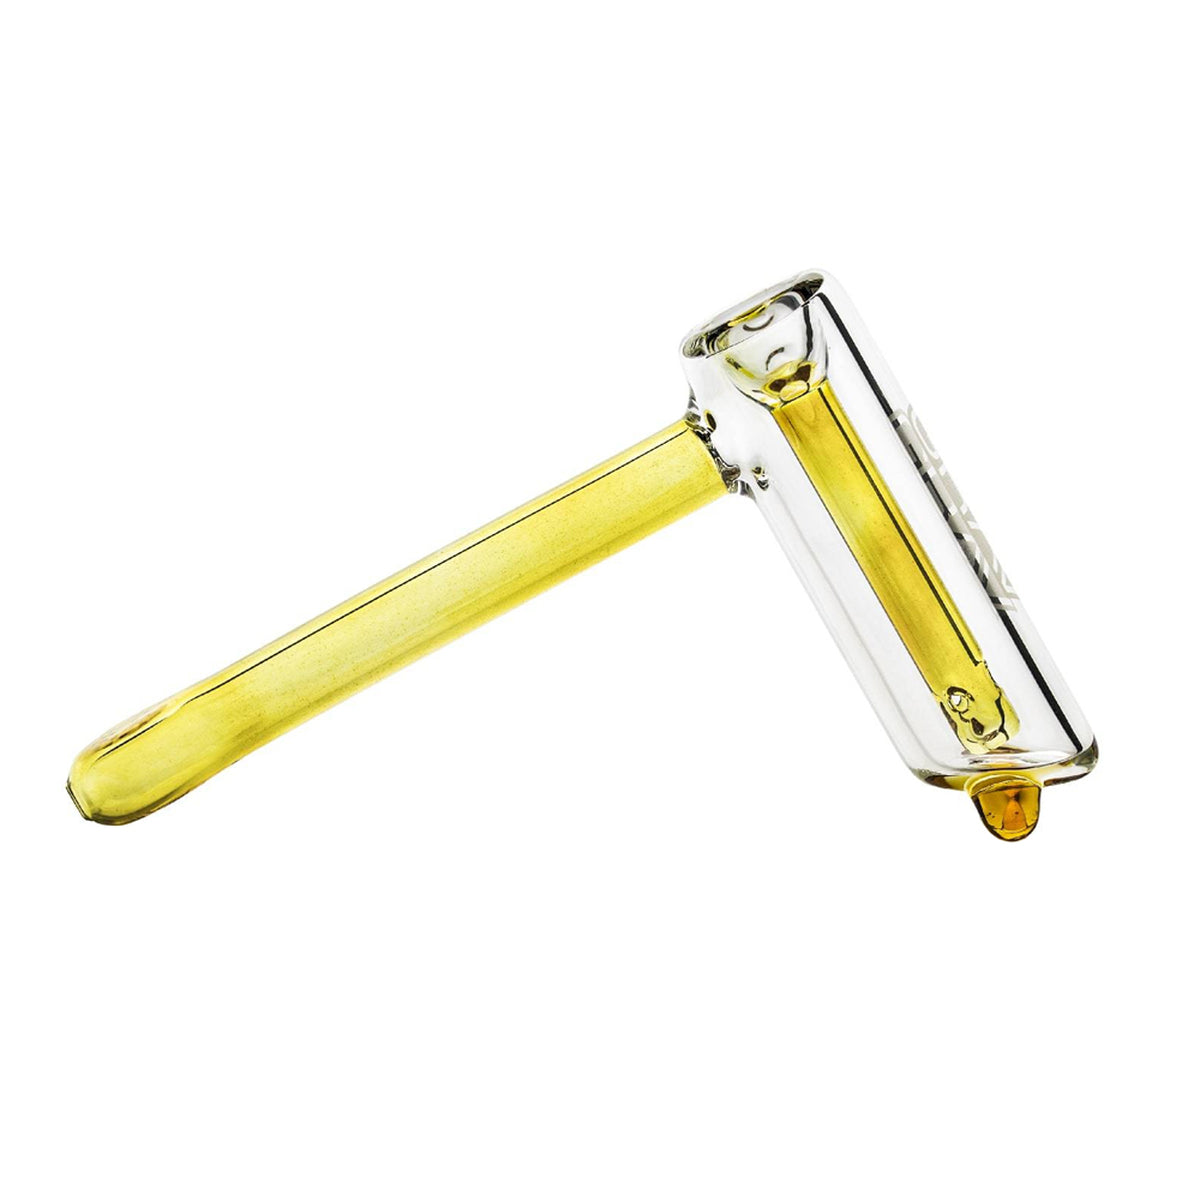 The small Grav Hammer Bubbler is 3" tall and made on 25mm tubing. Its fission downstem diffuses smoke through water, and its feet stabilize the bubbler between uses. No accessories are necessary for using this bubbler, and it functions best with approximately 0.5" of water.